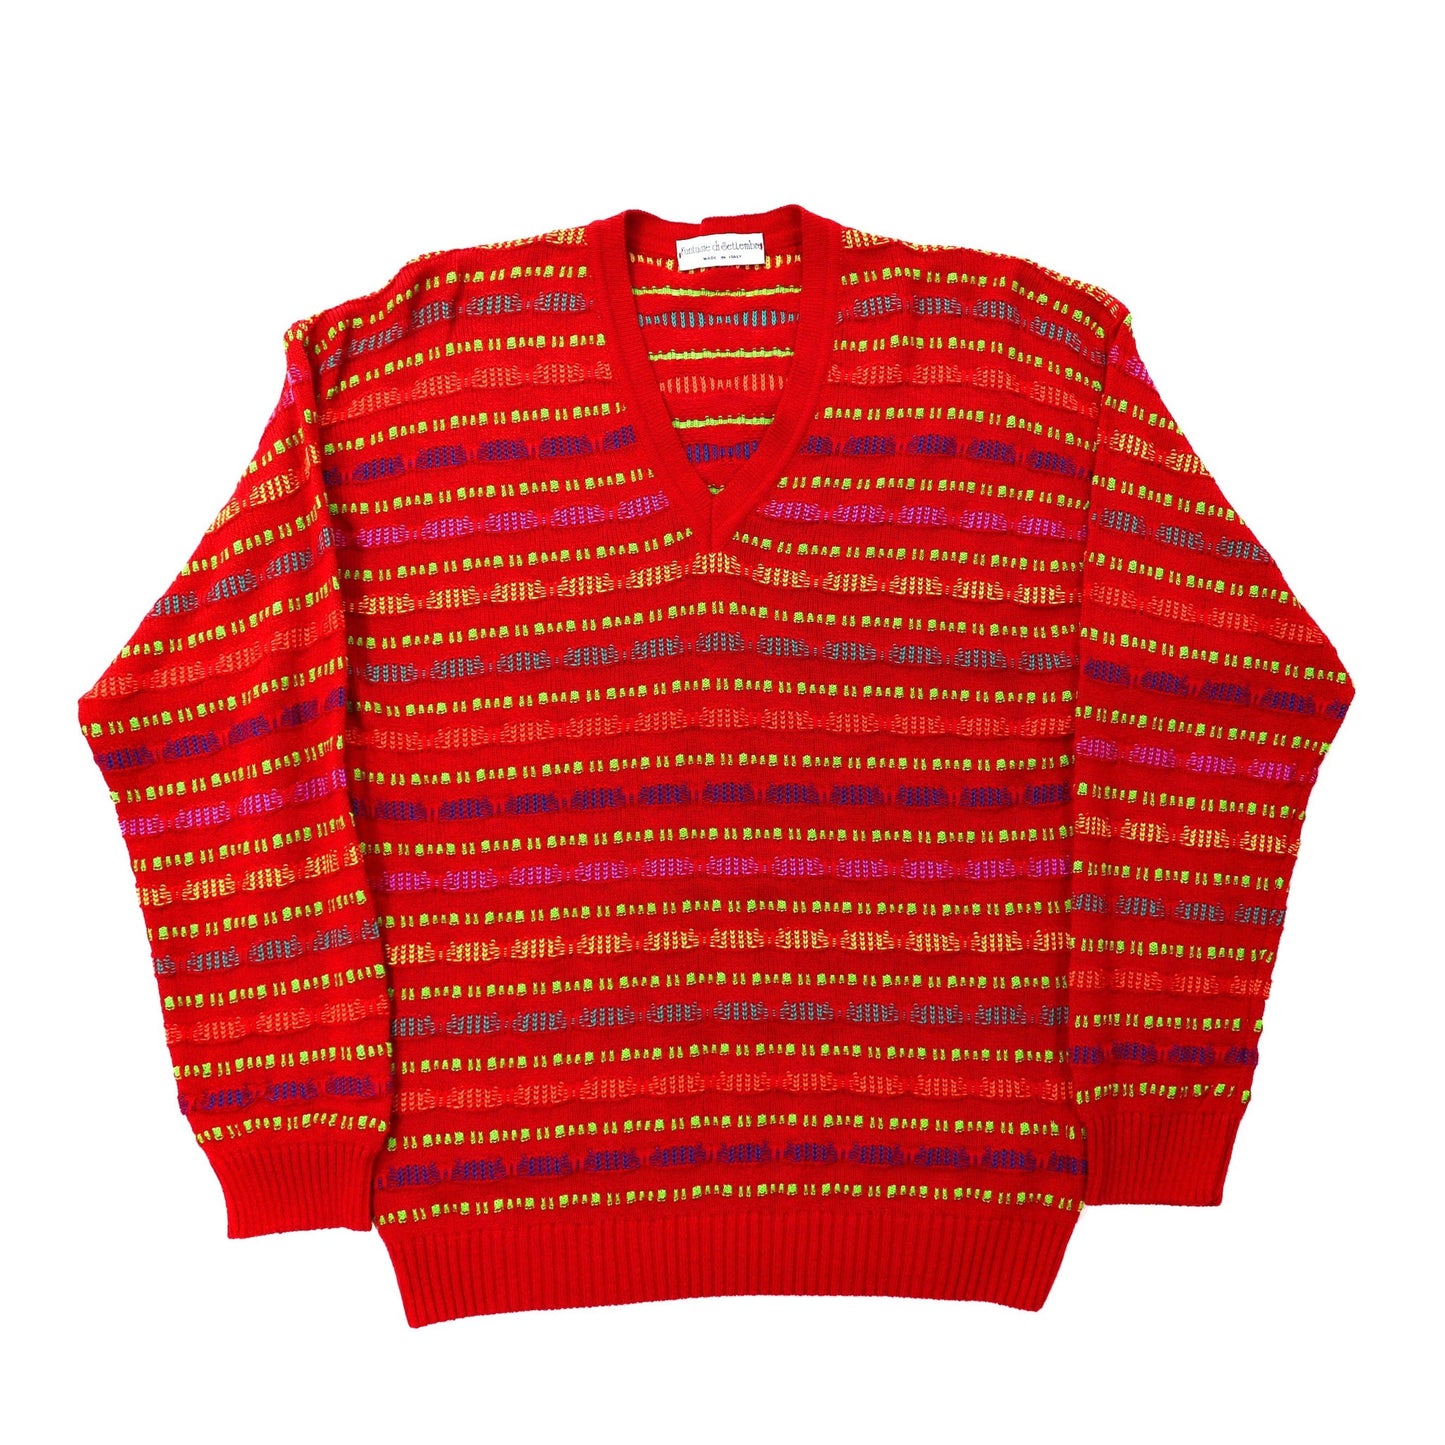 Fantasie Di Settembrew 3D Knit Sweater 48 Red Patterned Acrylic